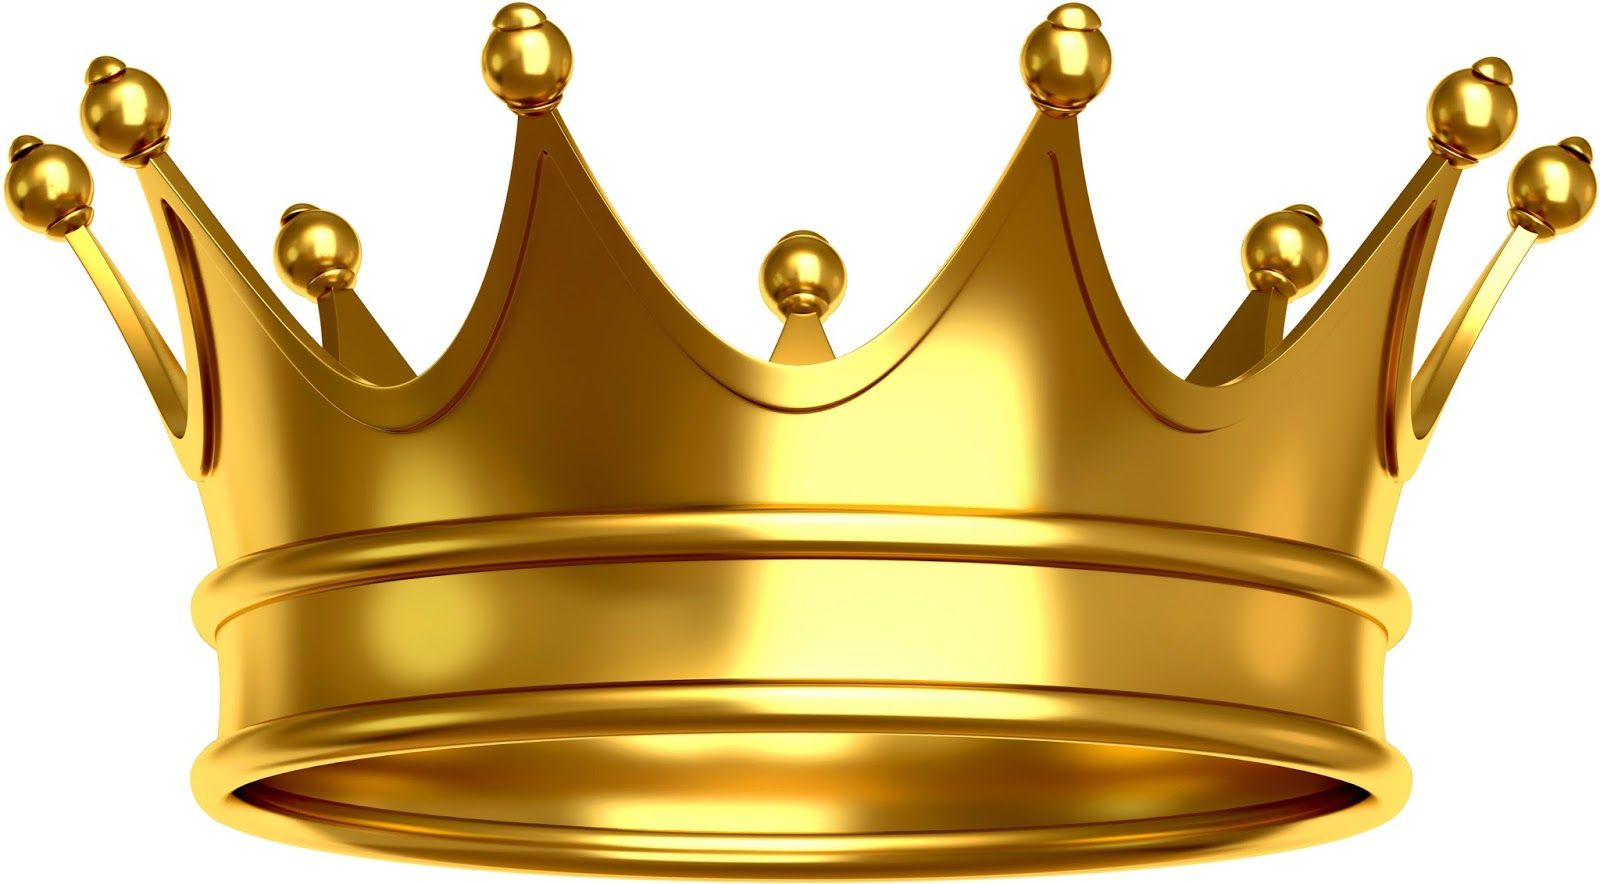 Free Kings Crown Pics, Download Free Clip Art, Free Clip Art on Clipart Library